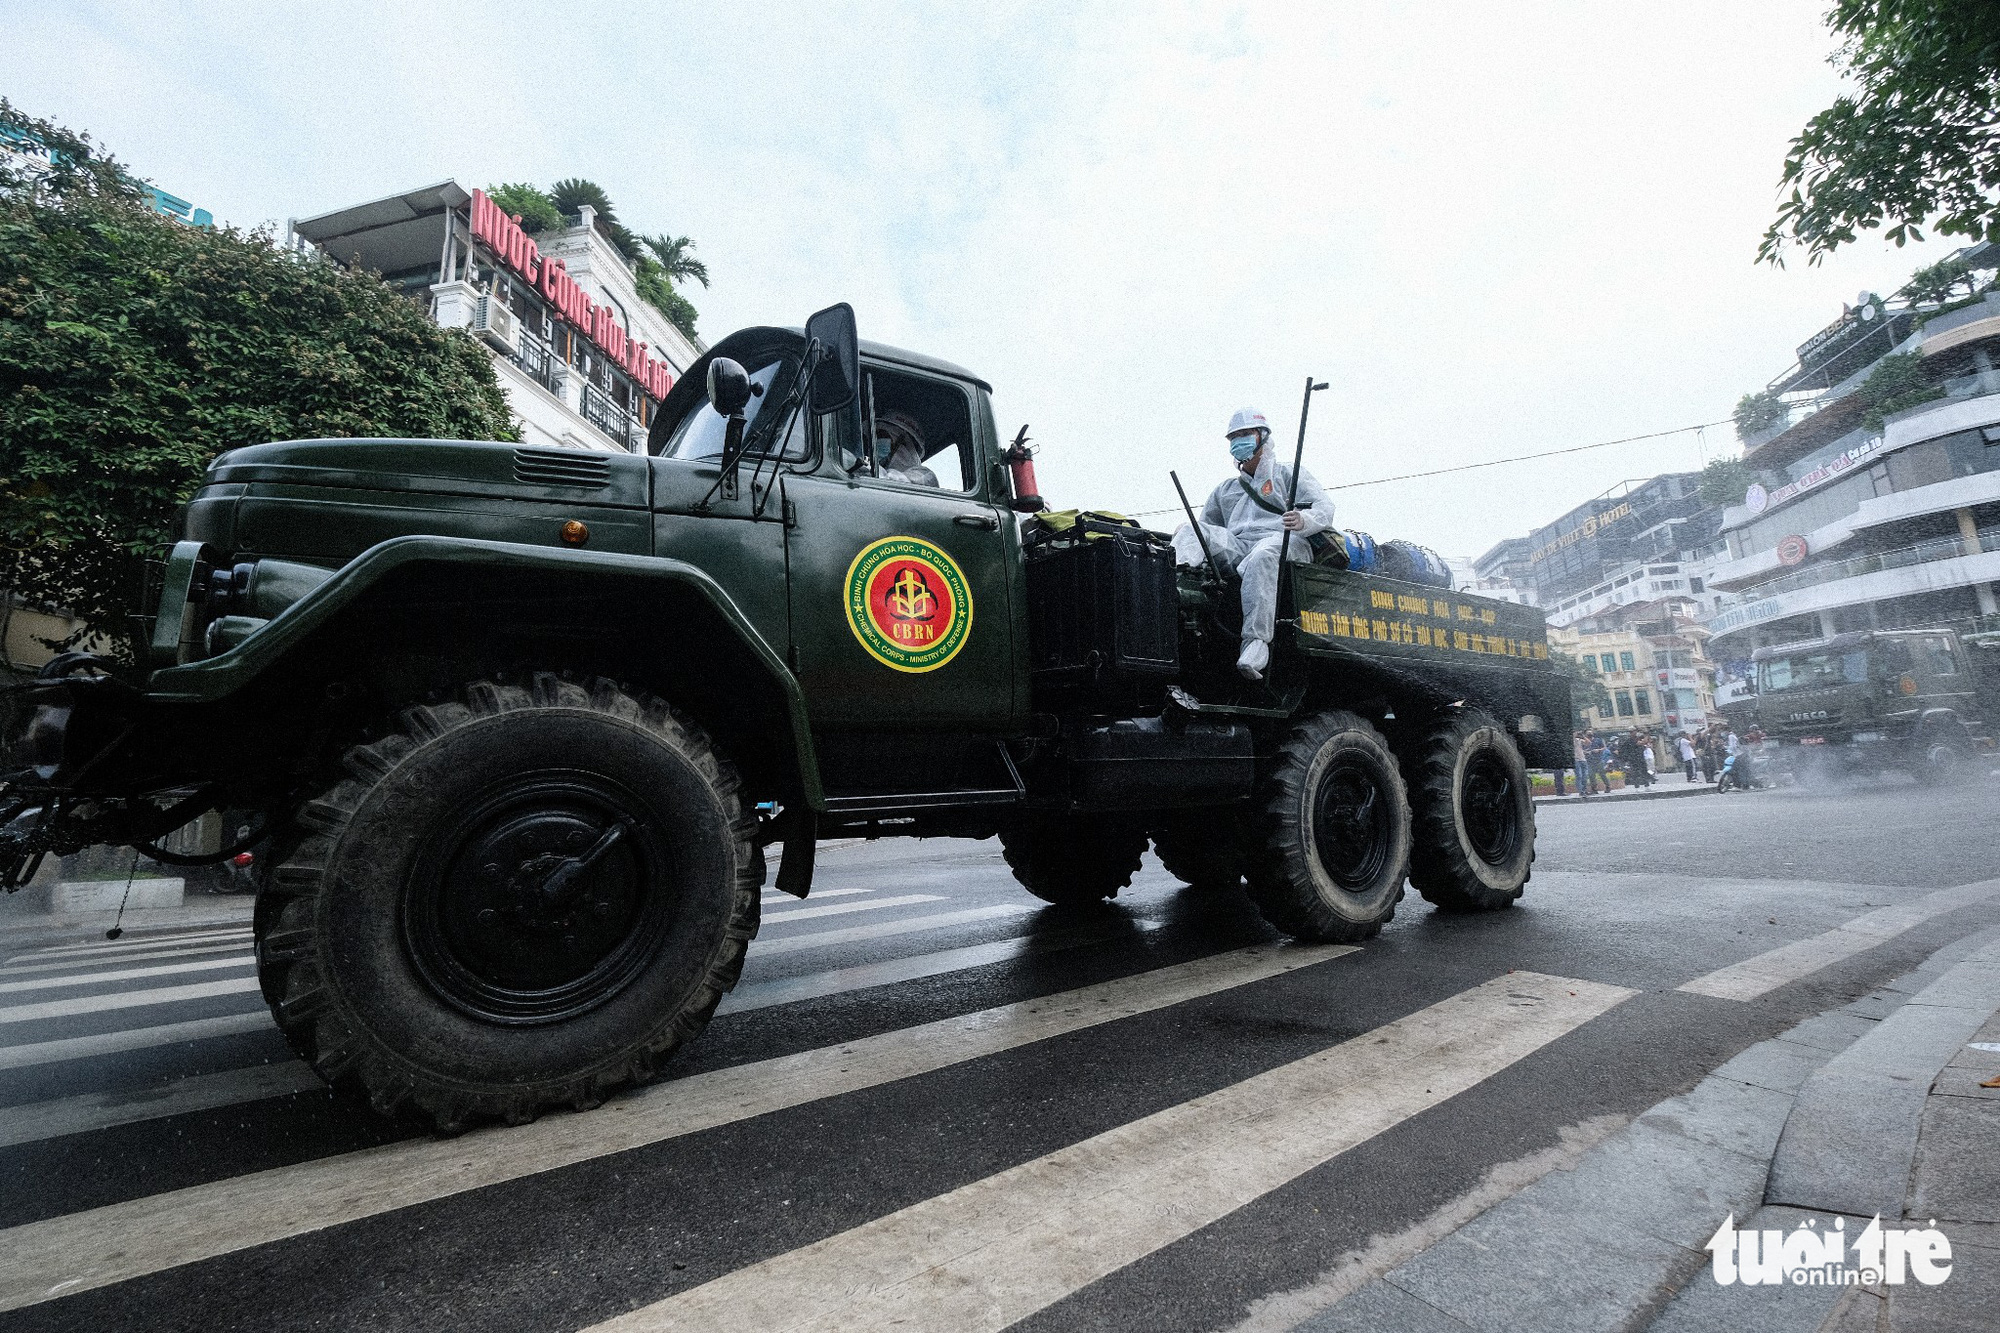 This image shows a specialized vehicle spraying chemicals to disinfect a street in Hoan Kiem District, Hanoi, July 26, 2021. Photo: Nam Tran / Tuoi Tre